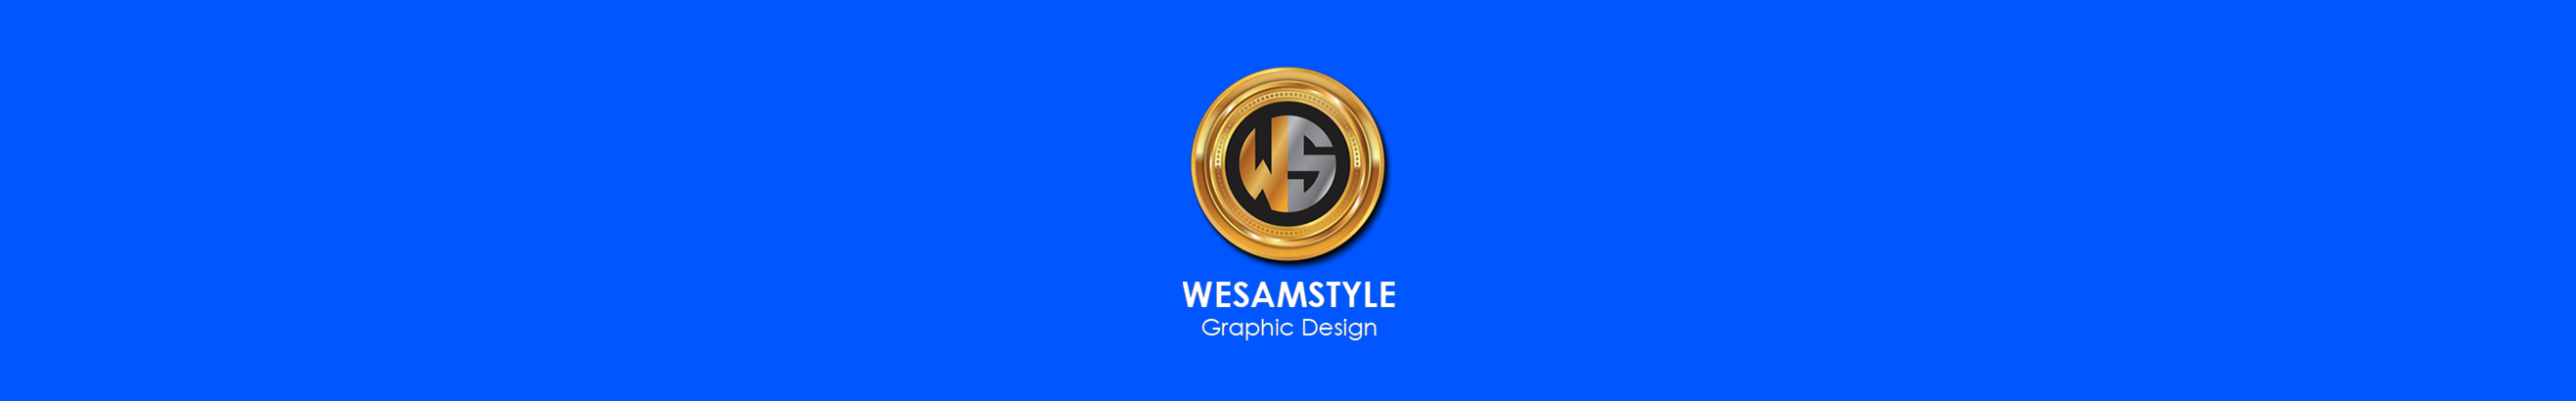 wesam style's profile banner